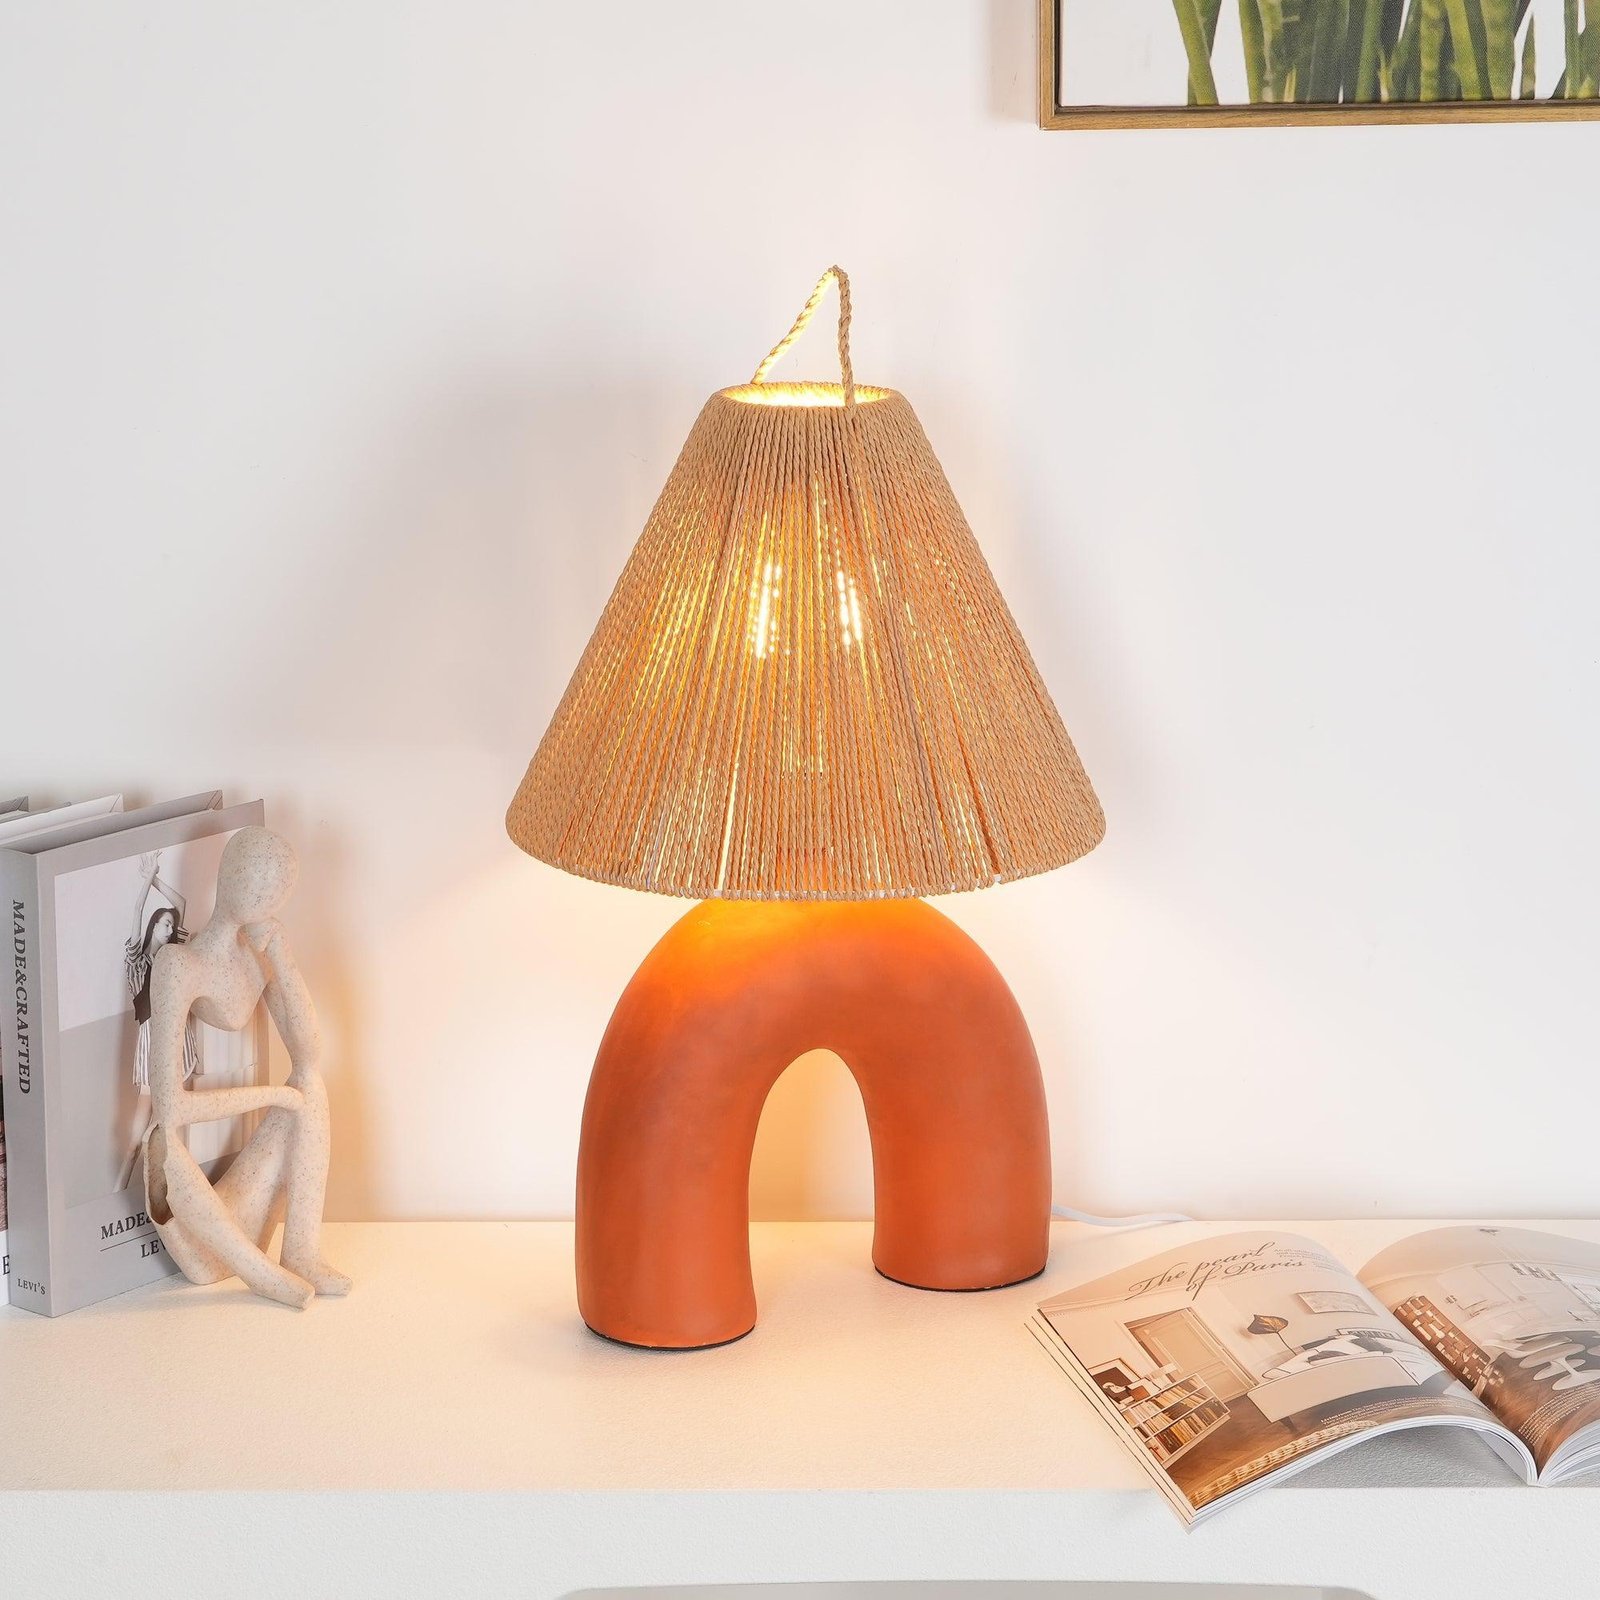 Arched Design Table Lamp, Terra Cotta Material, Diameter 13.4" x Height 17.3" (34cm x 44cm), Comes with UK Plug